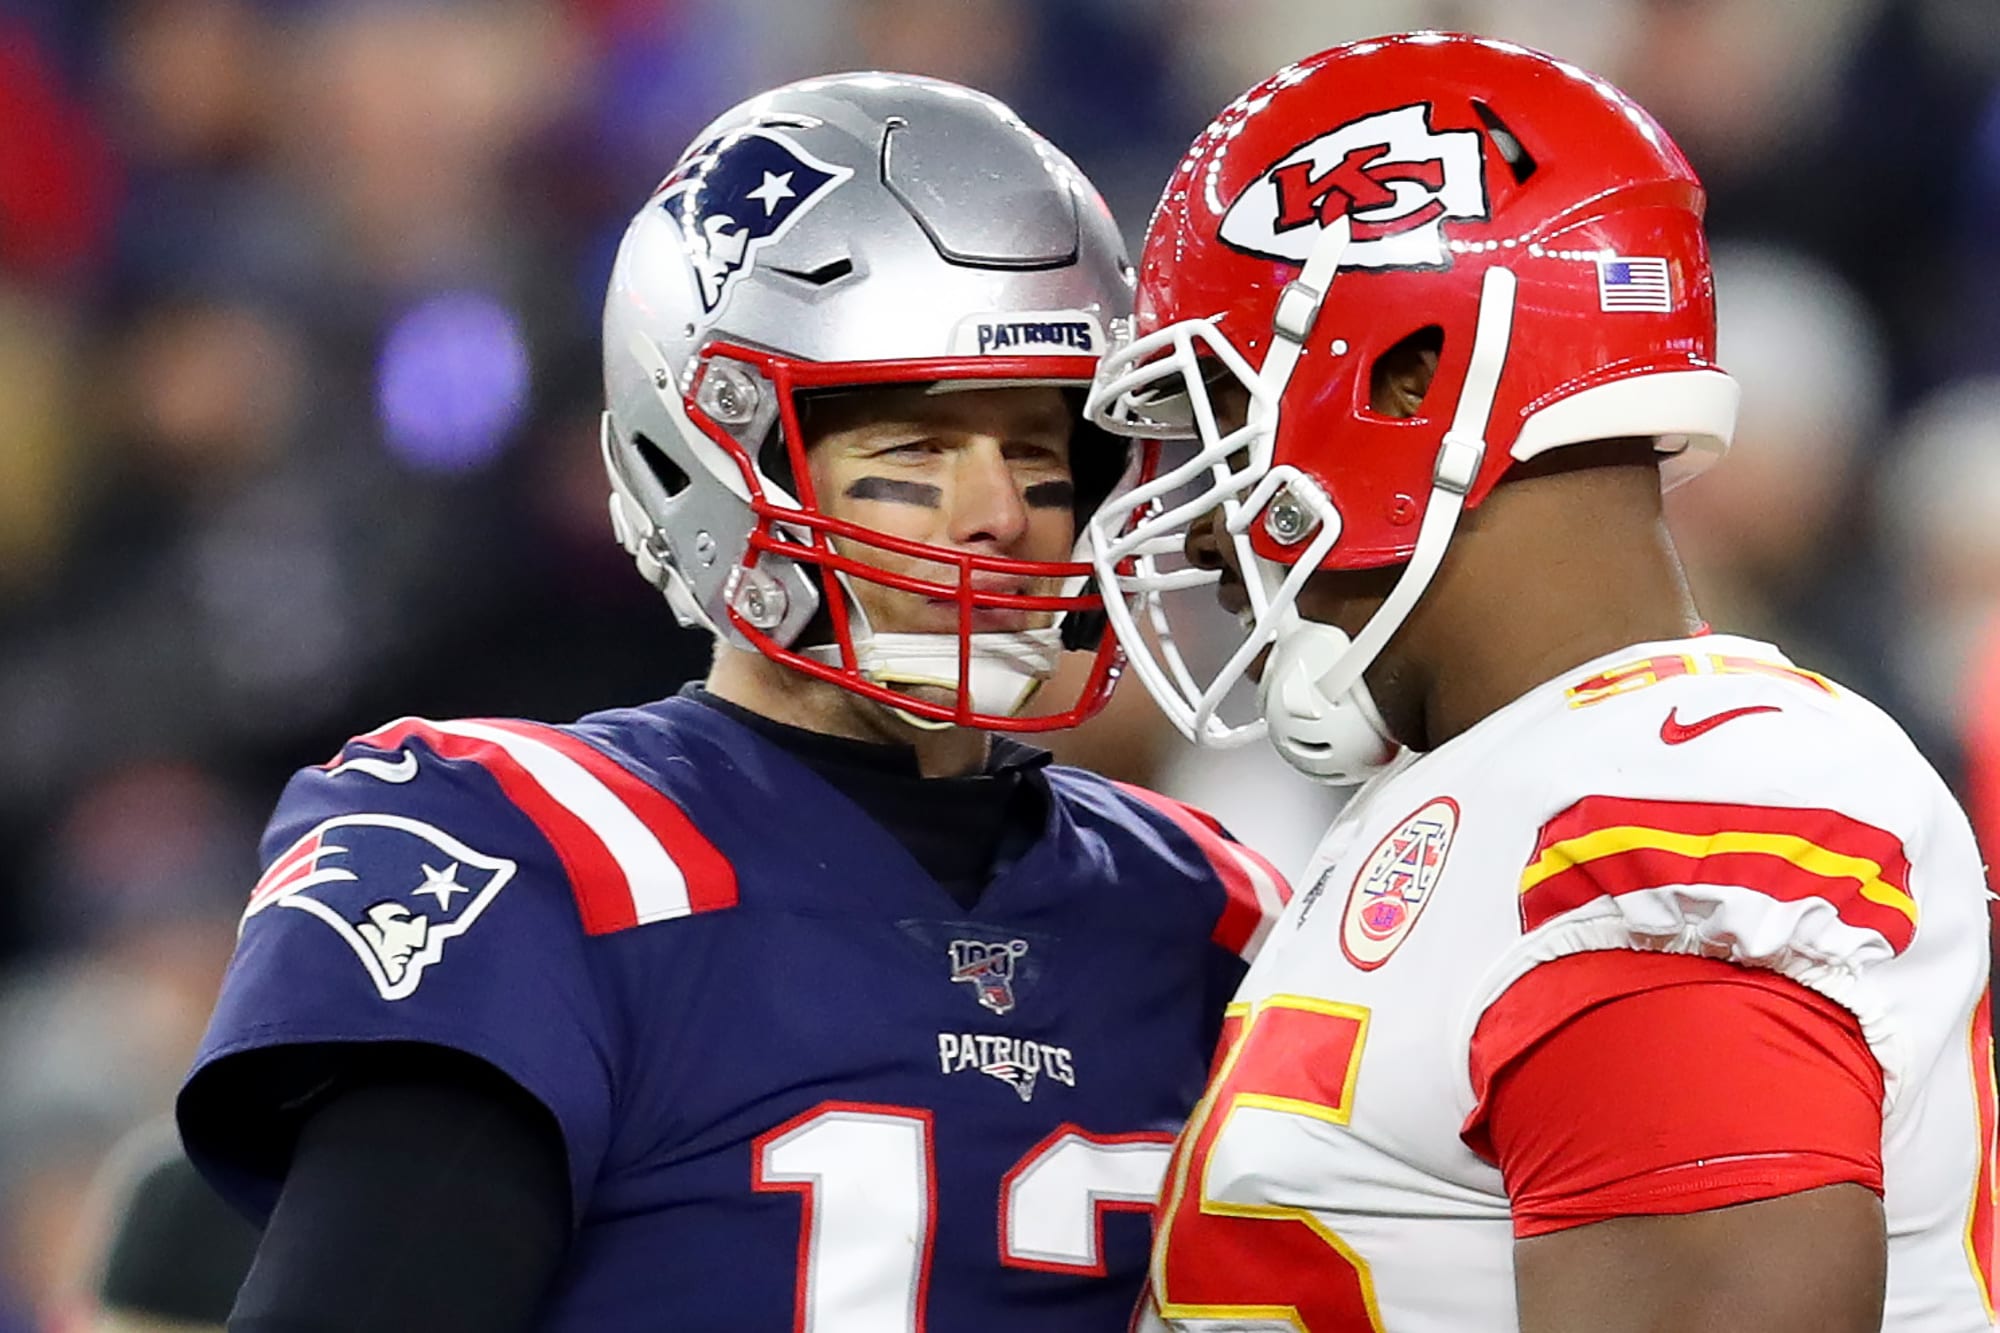 Kansas City Chiefs: Tom Brady could potentially join AFC West in 2020